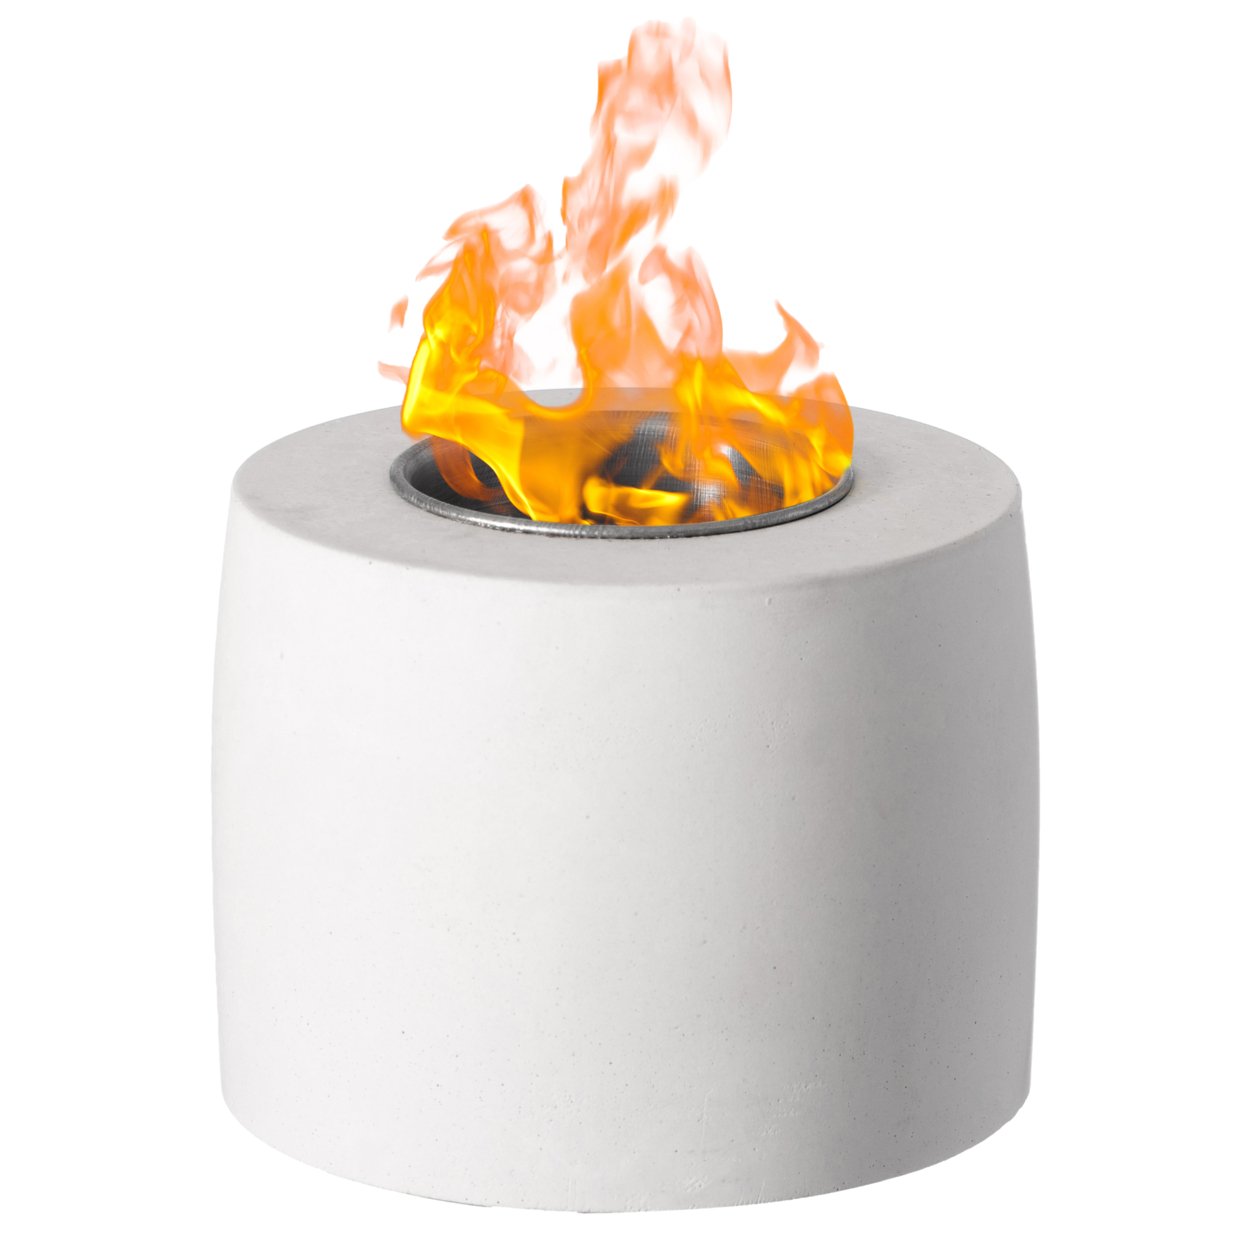 Mini Tabletop Fire Pit Rubbing Alcohol Fireplace Indoor Outdoor Portable Fire Concrete Bowl Pot Fireplace - Round